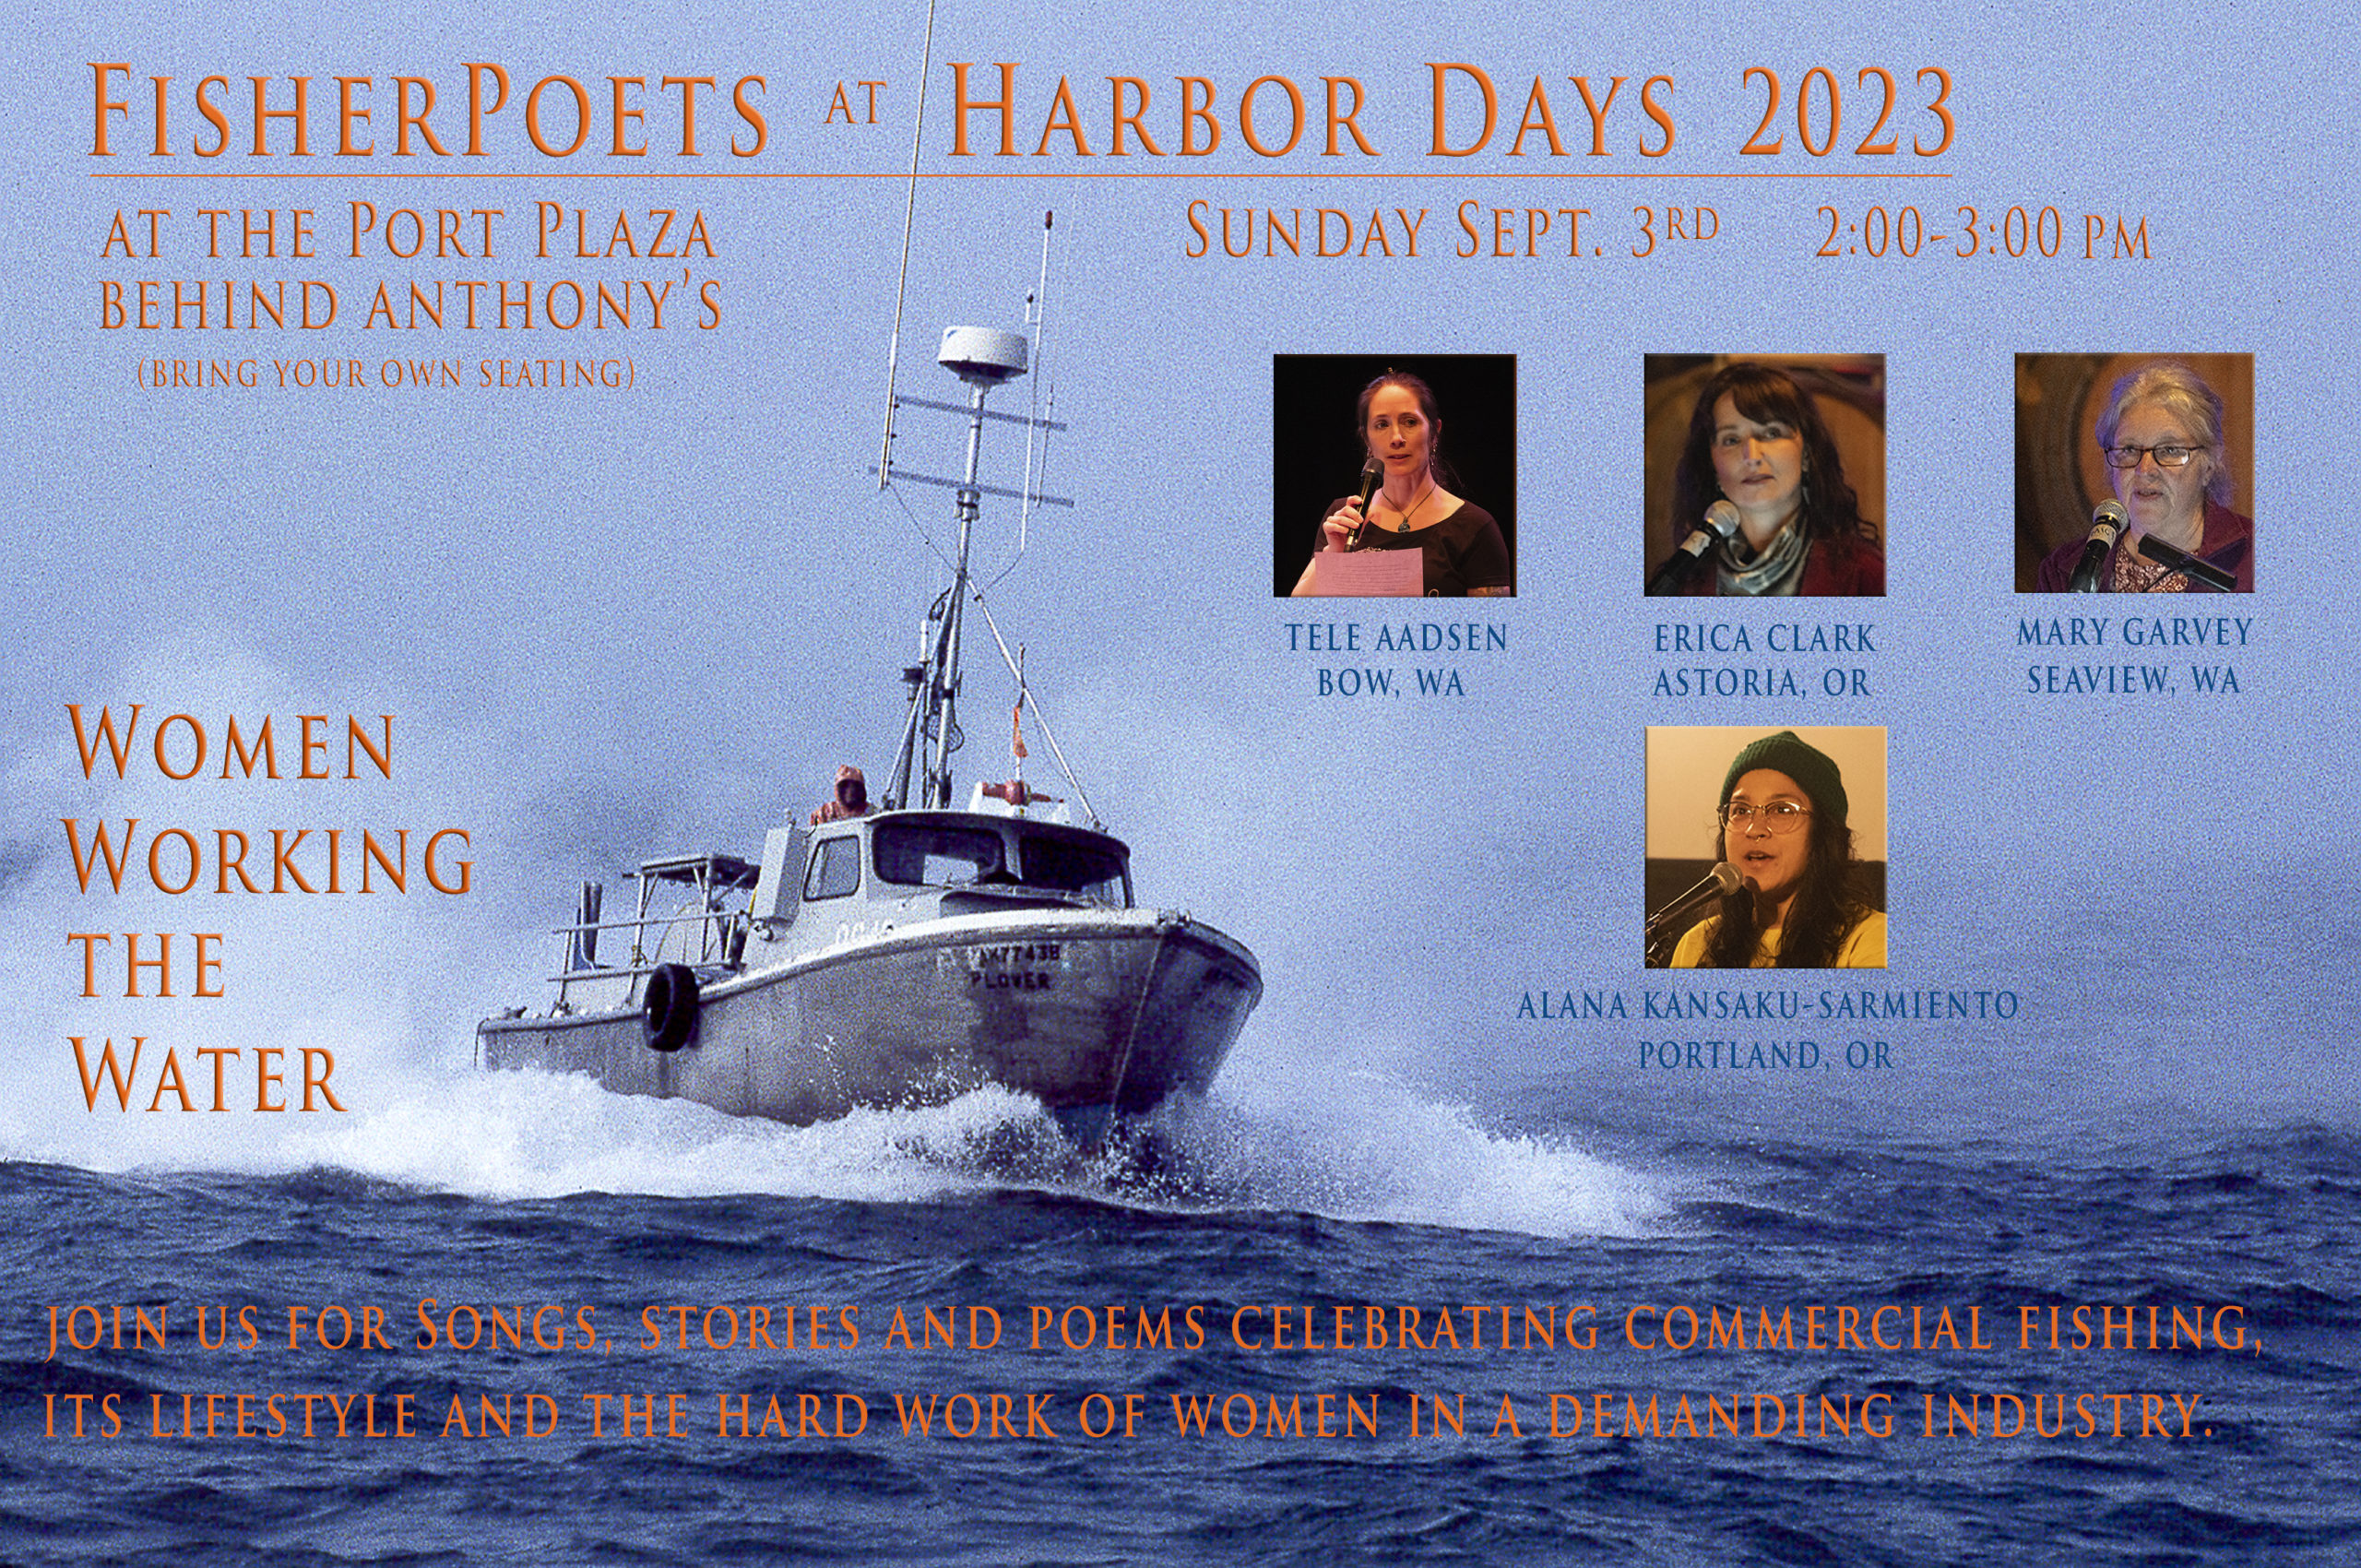 Image of a small commercial fishing vessel on water, with profile pictures of four peo